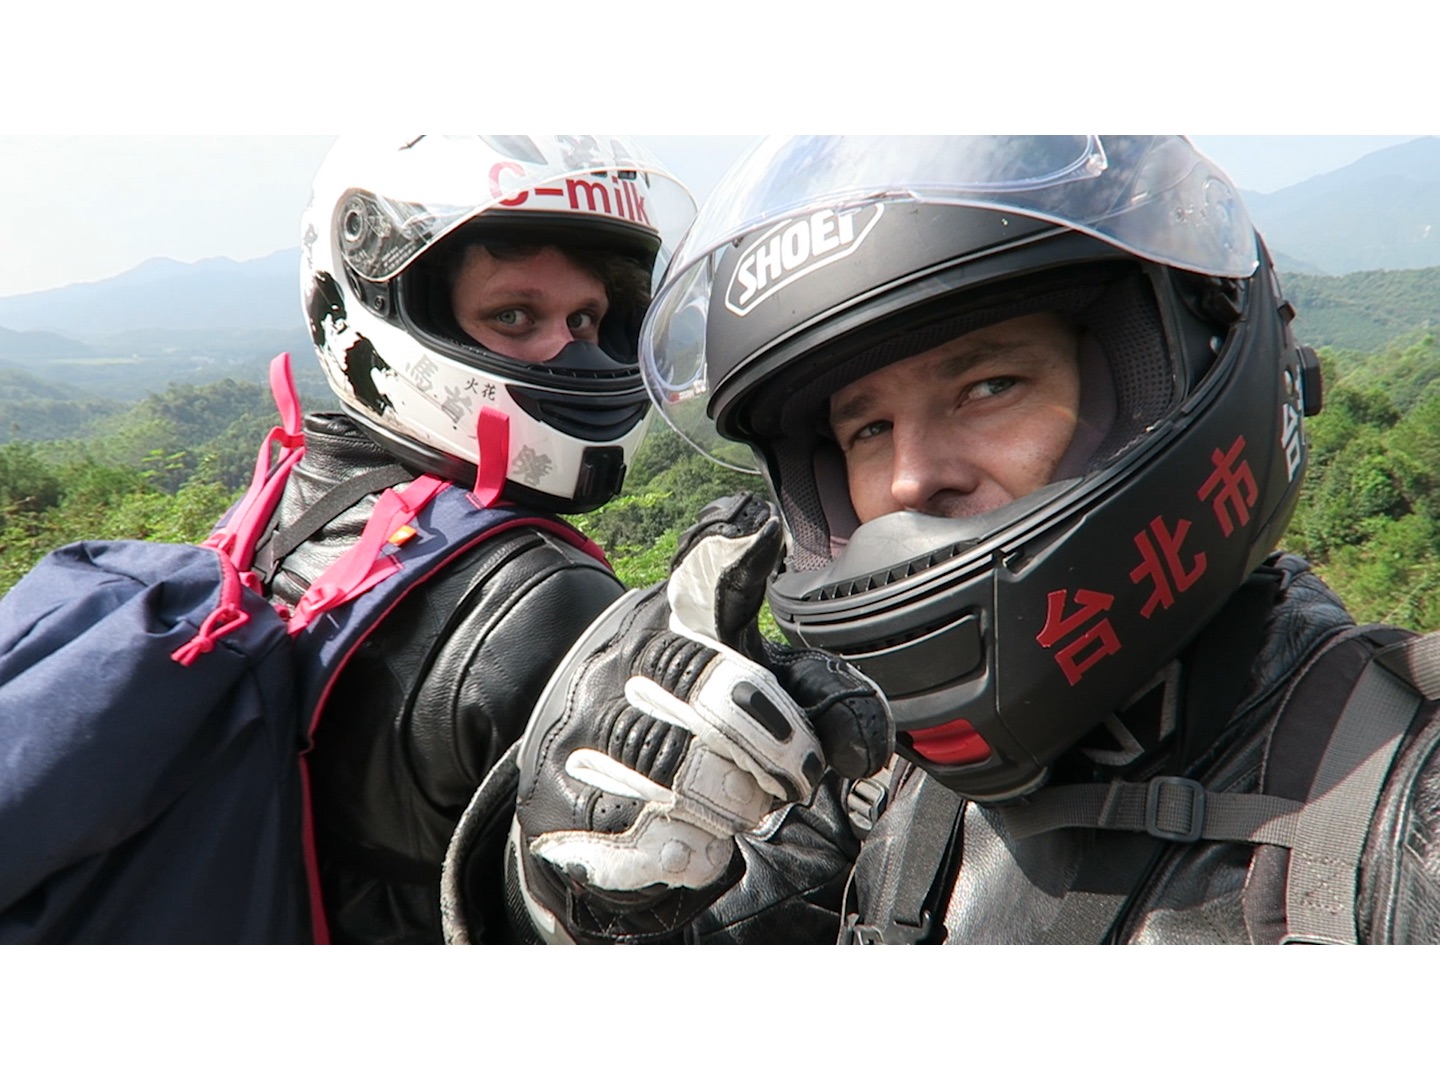 Watch Two Crazy Vloggers Drive 5,000km Across Southern China on Handmade Motorcycles